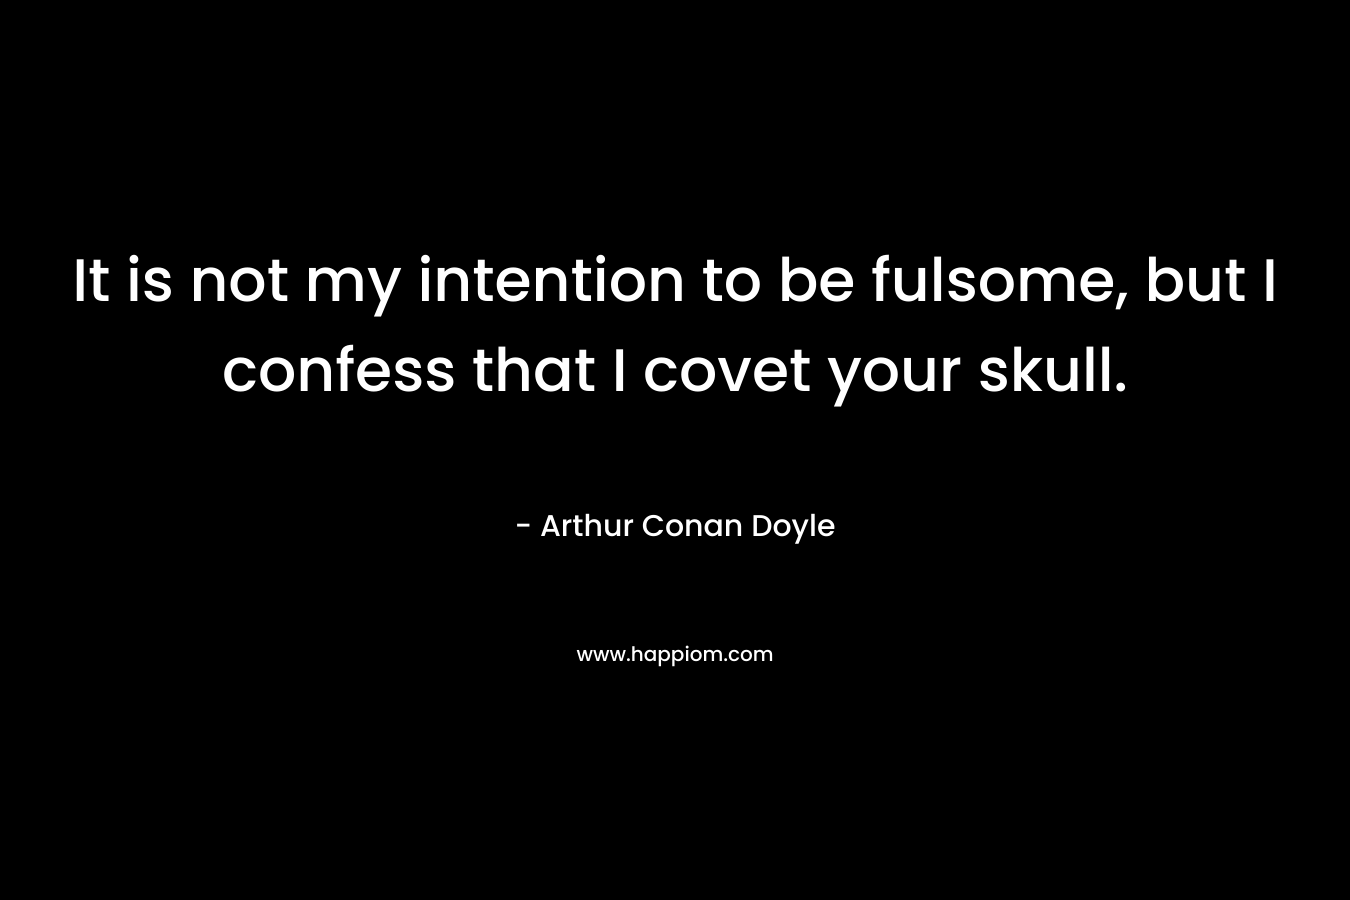 It is not my intention to be fulsome, but I confess that I covet your skull.